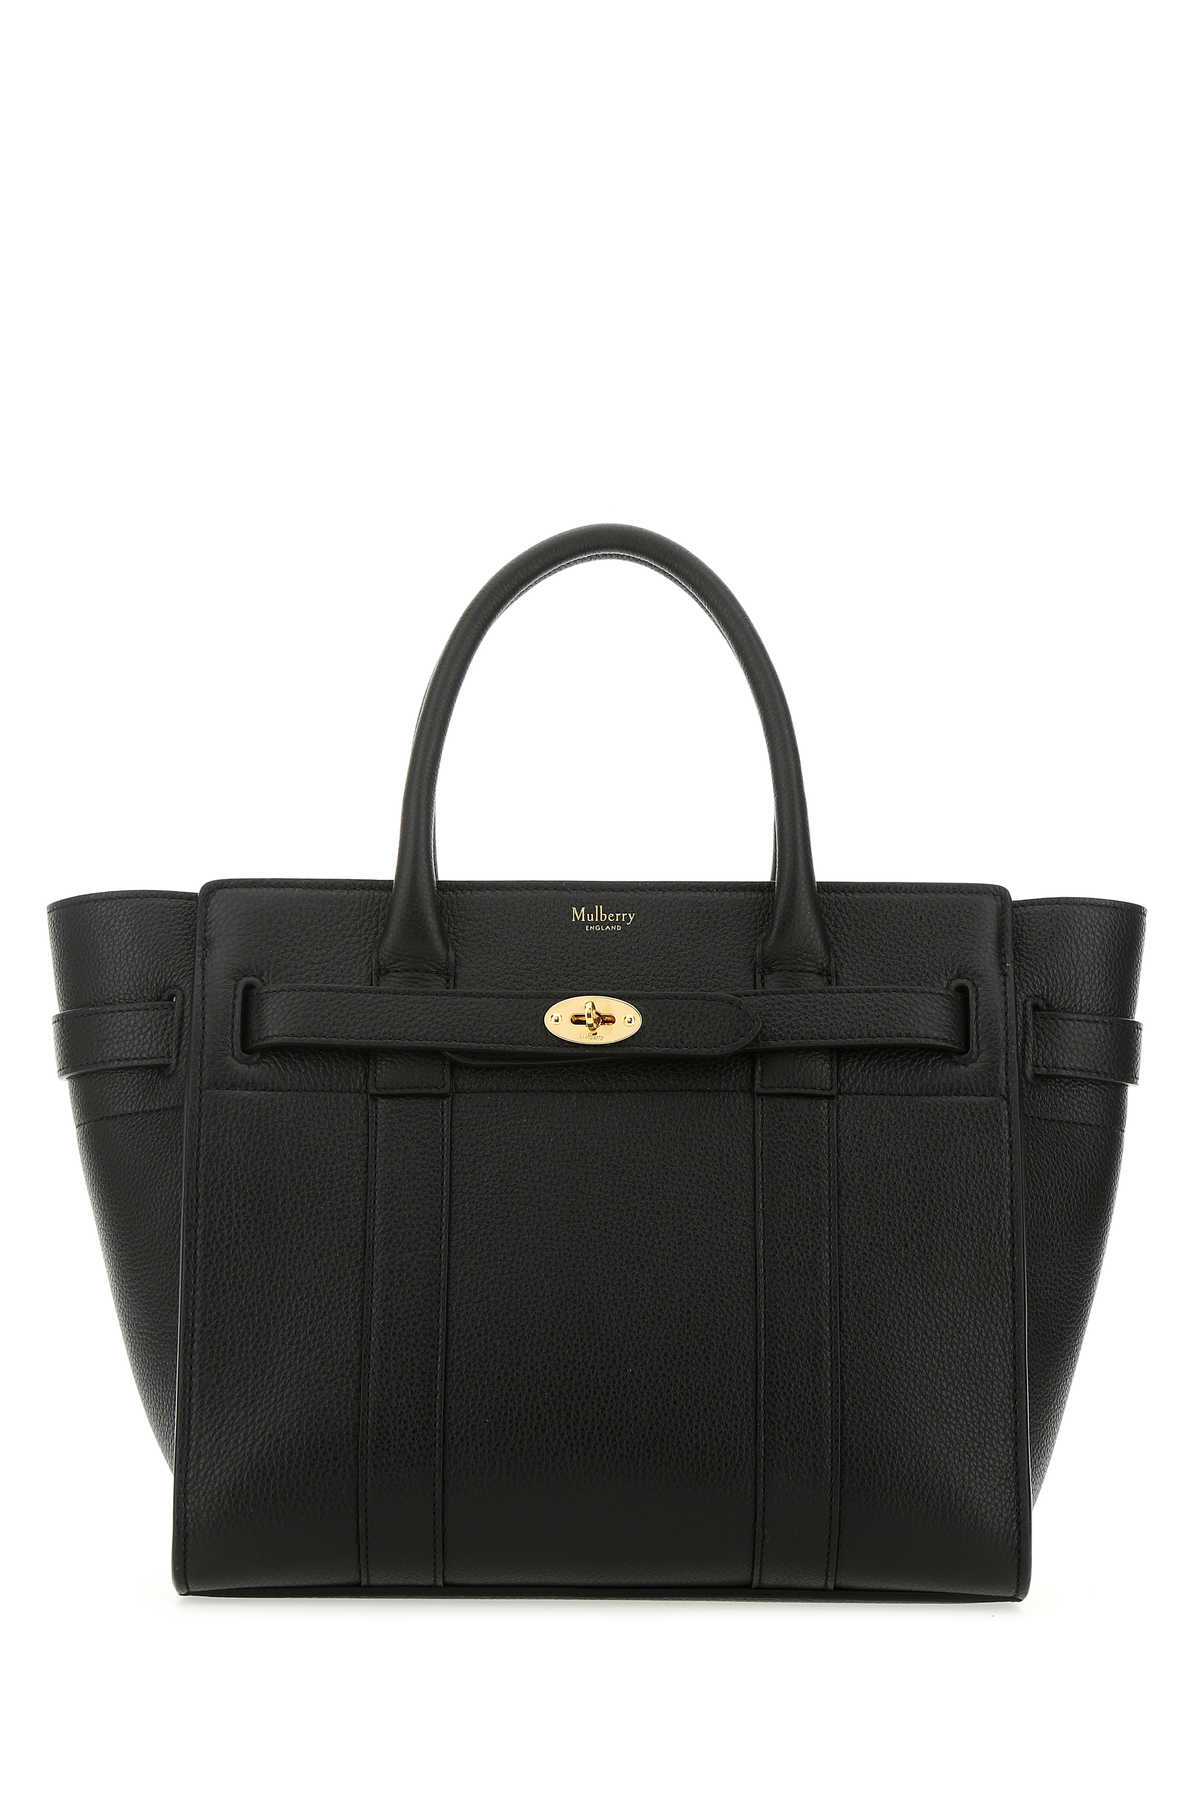 Shop Mulberry Black Leather Small Bayswater Handbag In A100